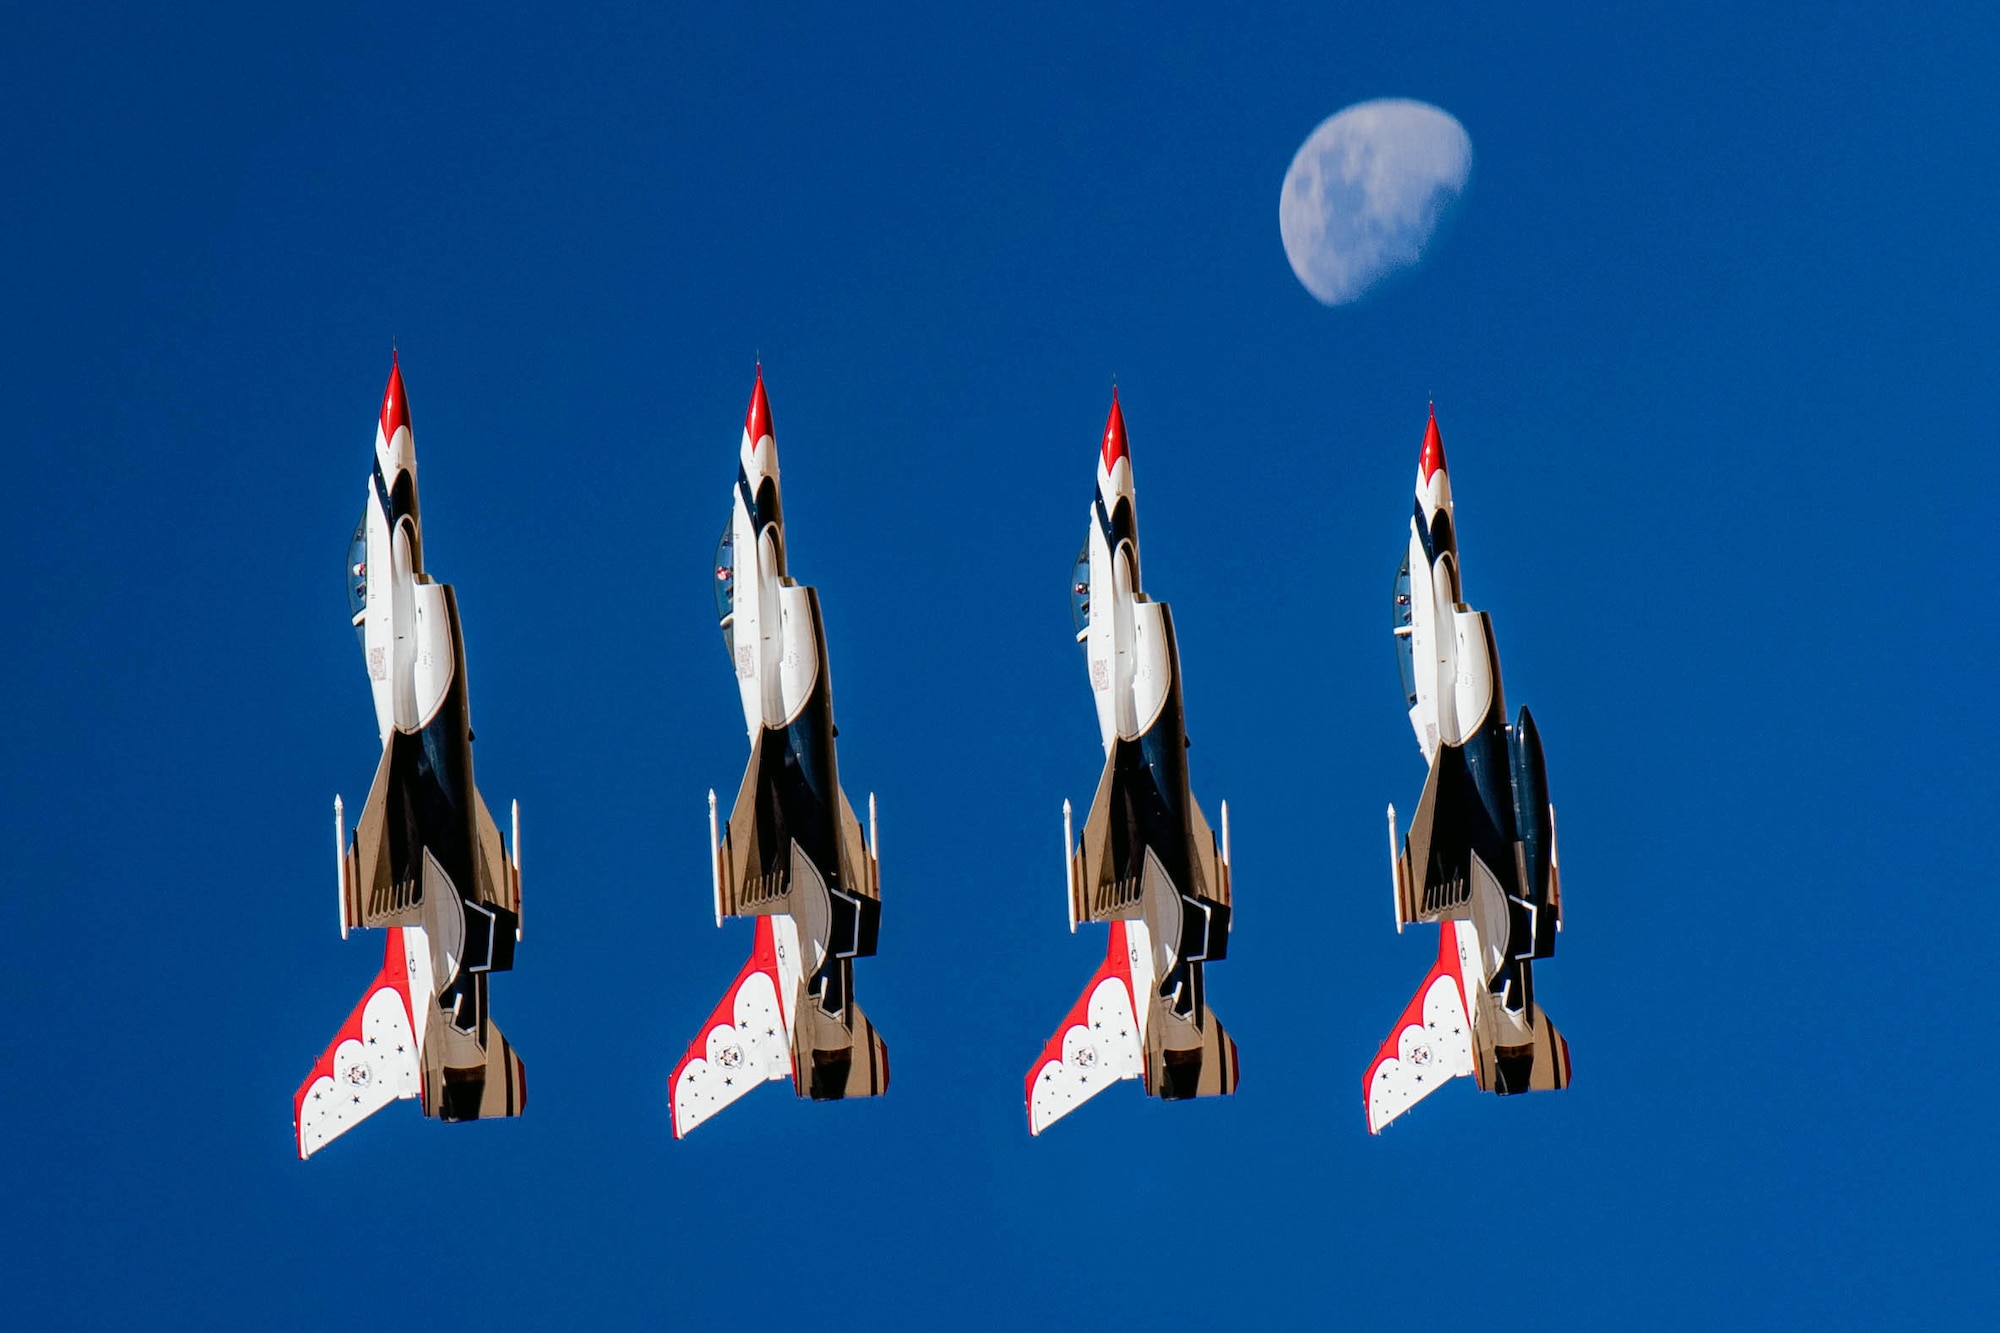 The United States Air Force Air Demonstration Squadron "Thunderbirds" practice